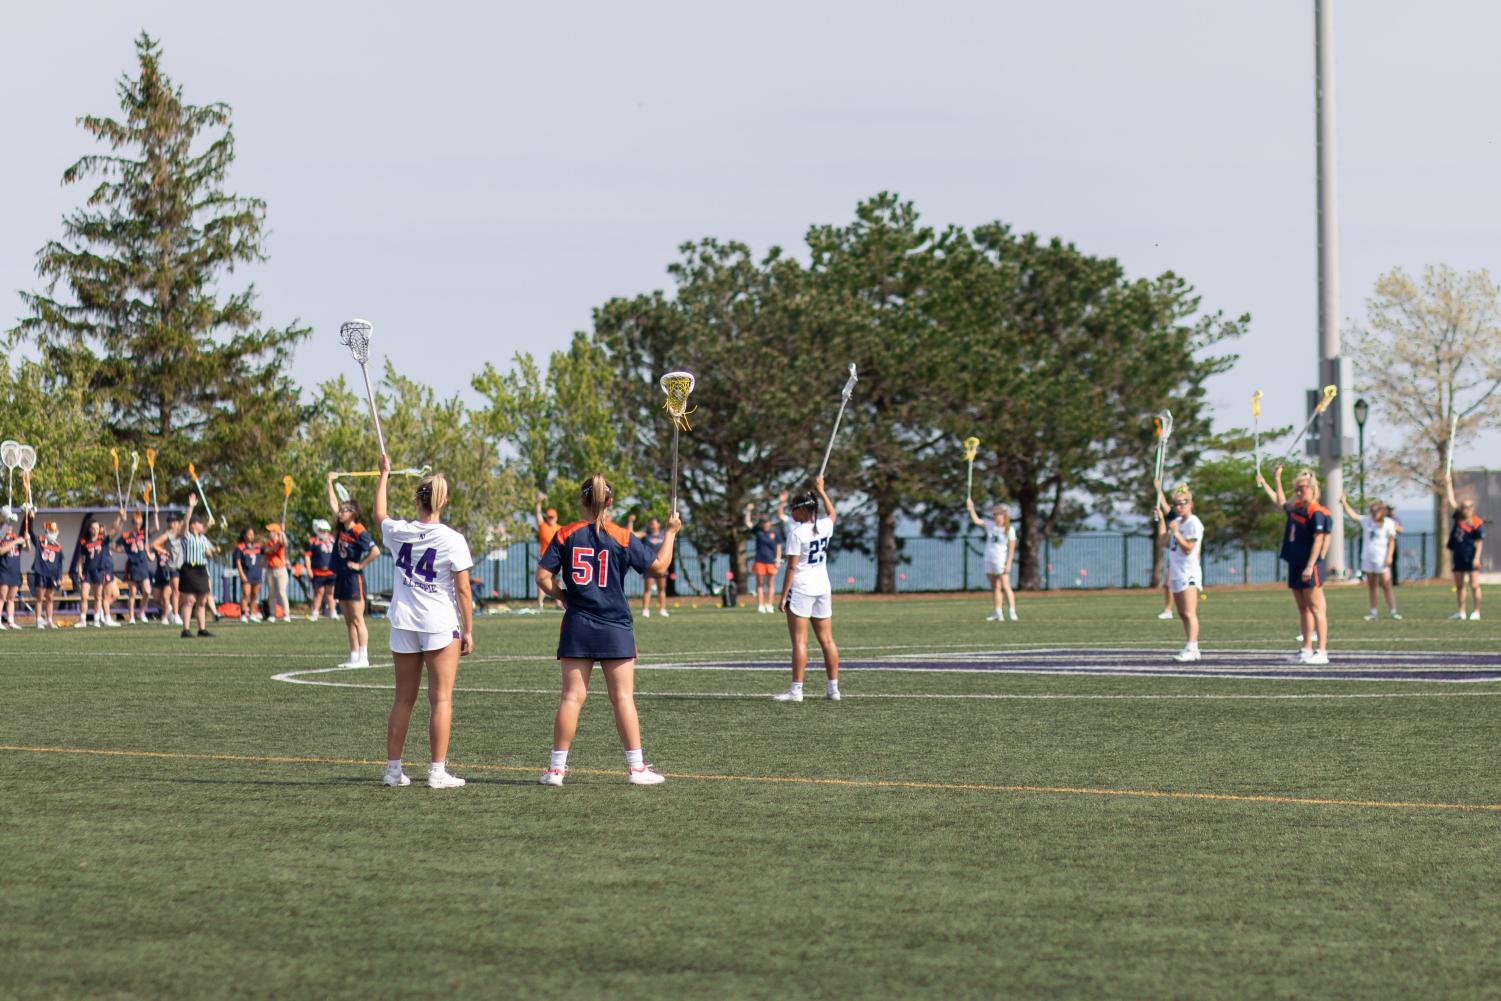 Players in both white and blue jerseys hold up their lacrosse sticks in unison.